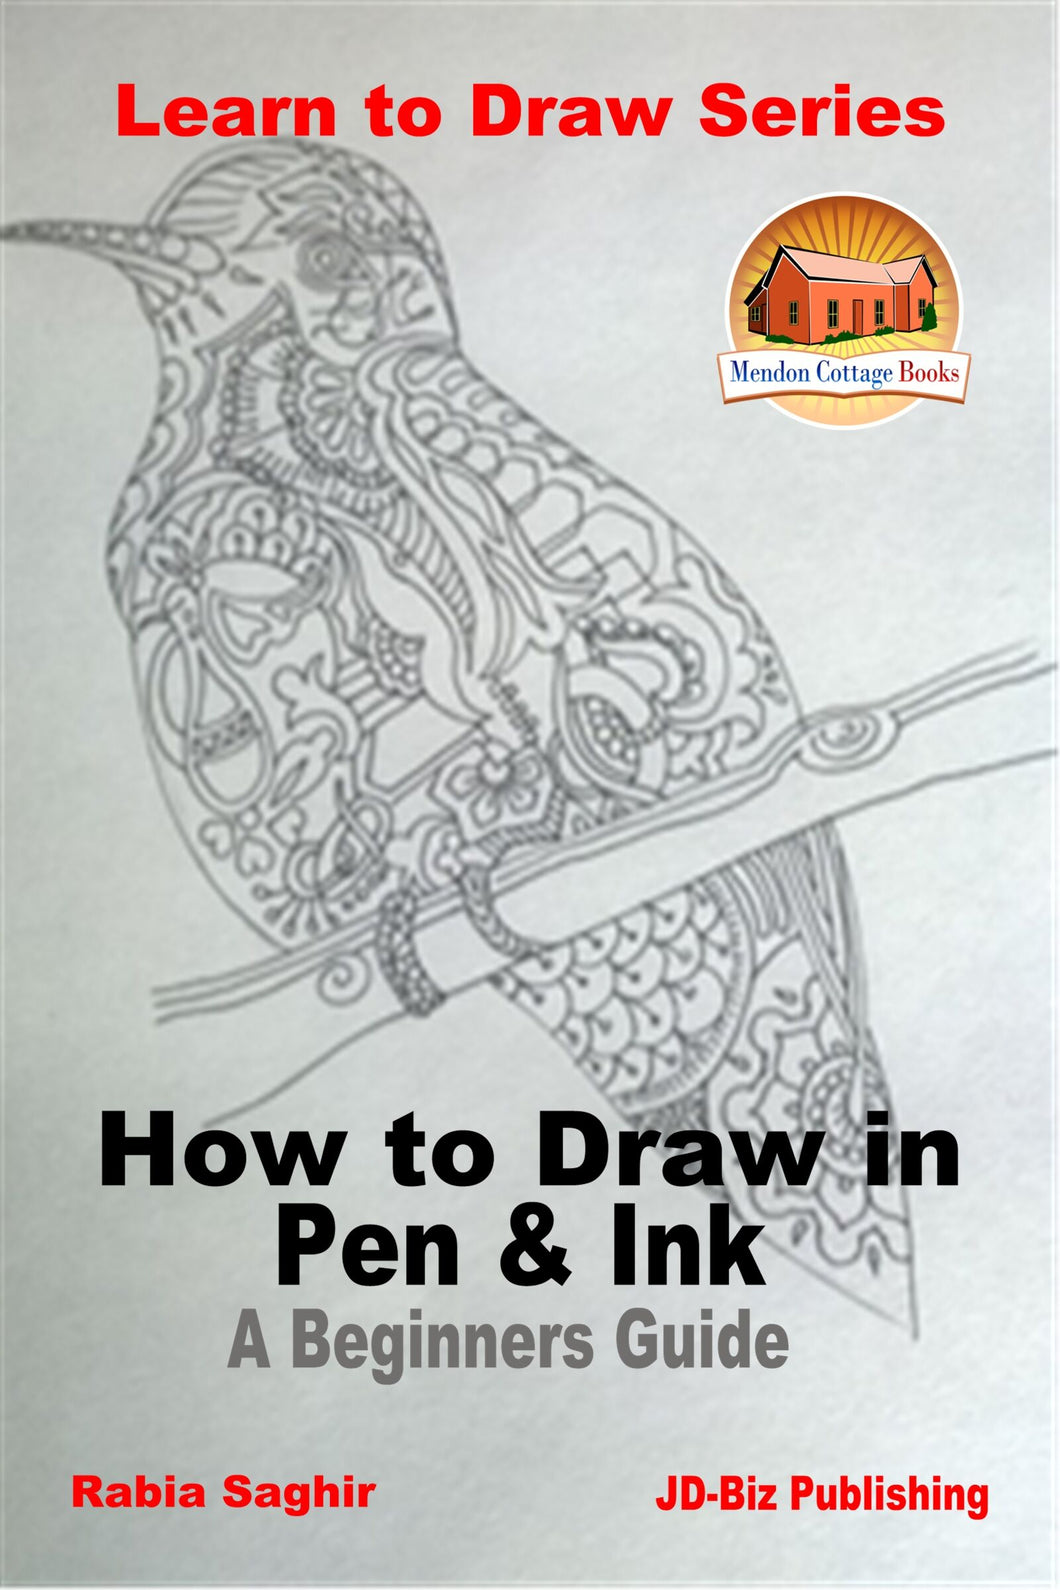 How to Draw in Pen & Ink